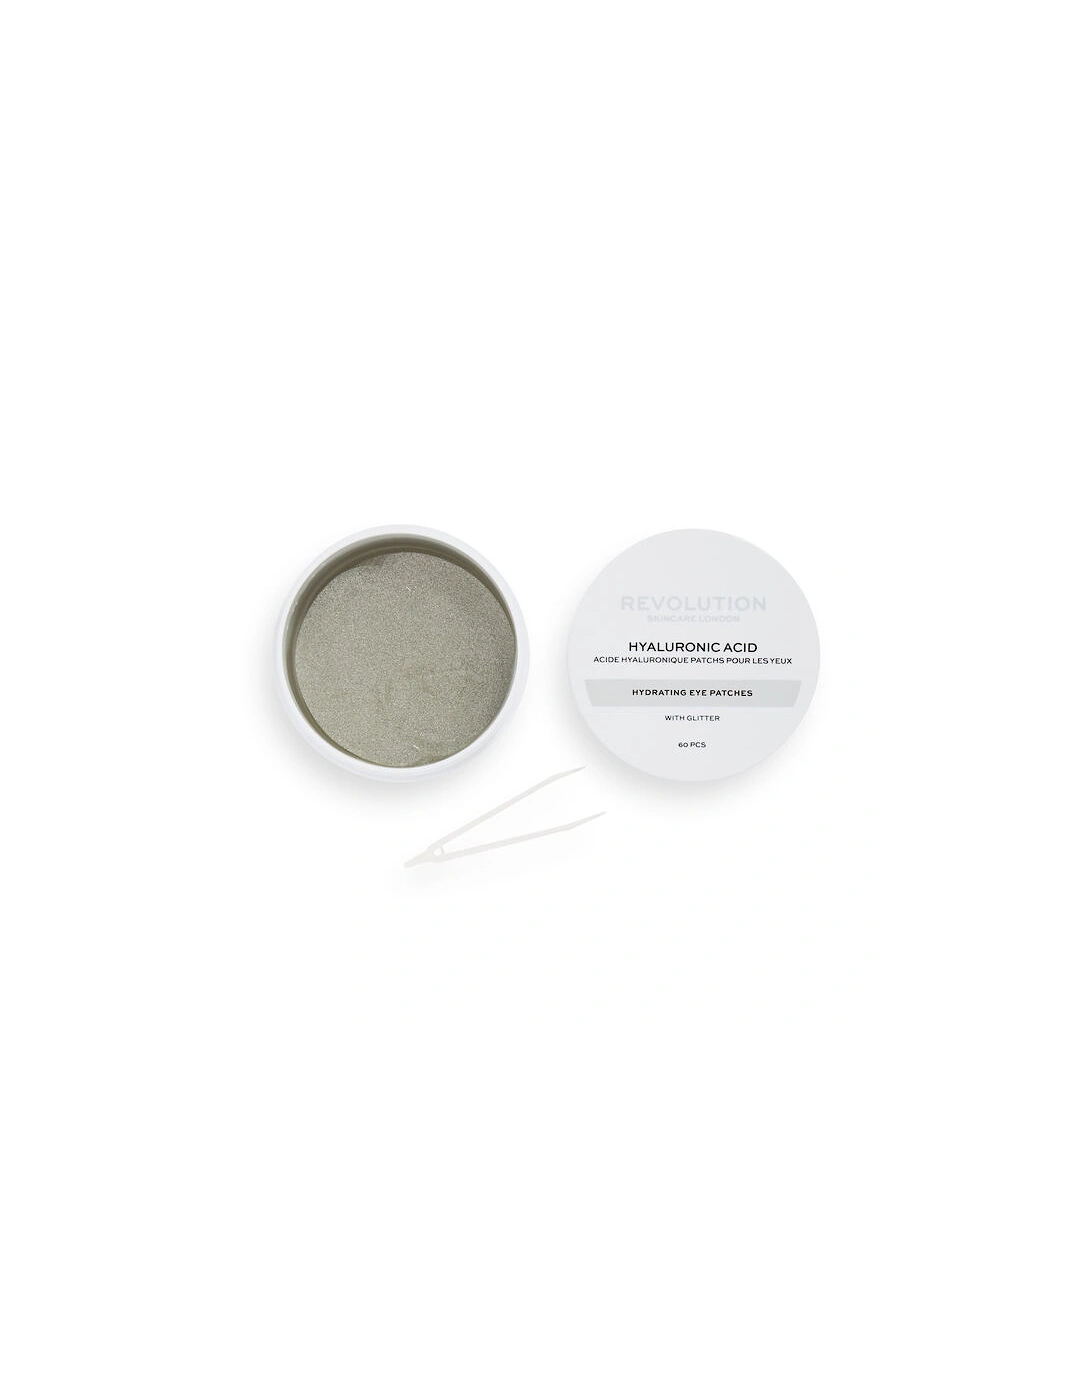 Skincare Glitter Hyaluronic Acid Hydrating Undereye Patches, 2 of 1